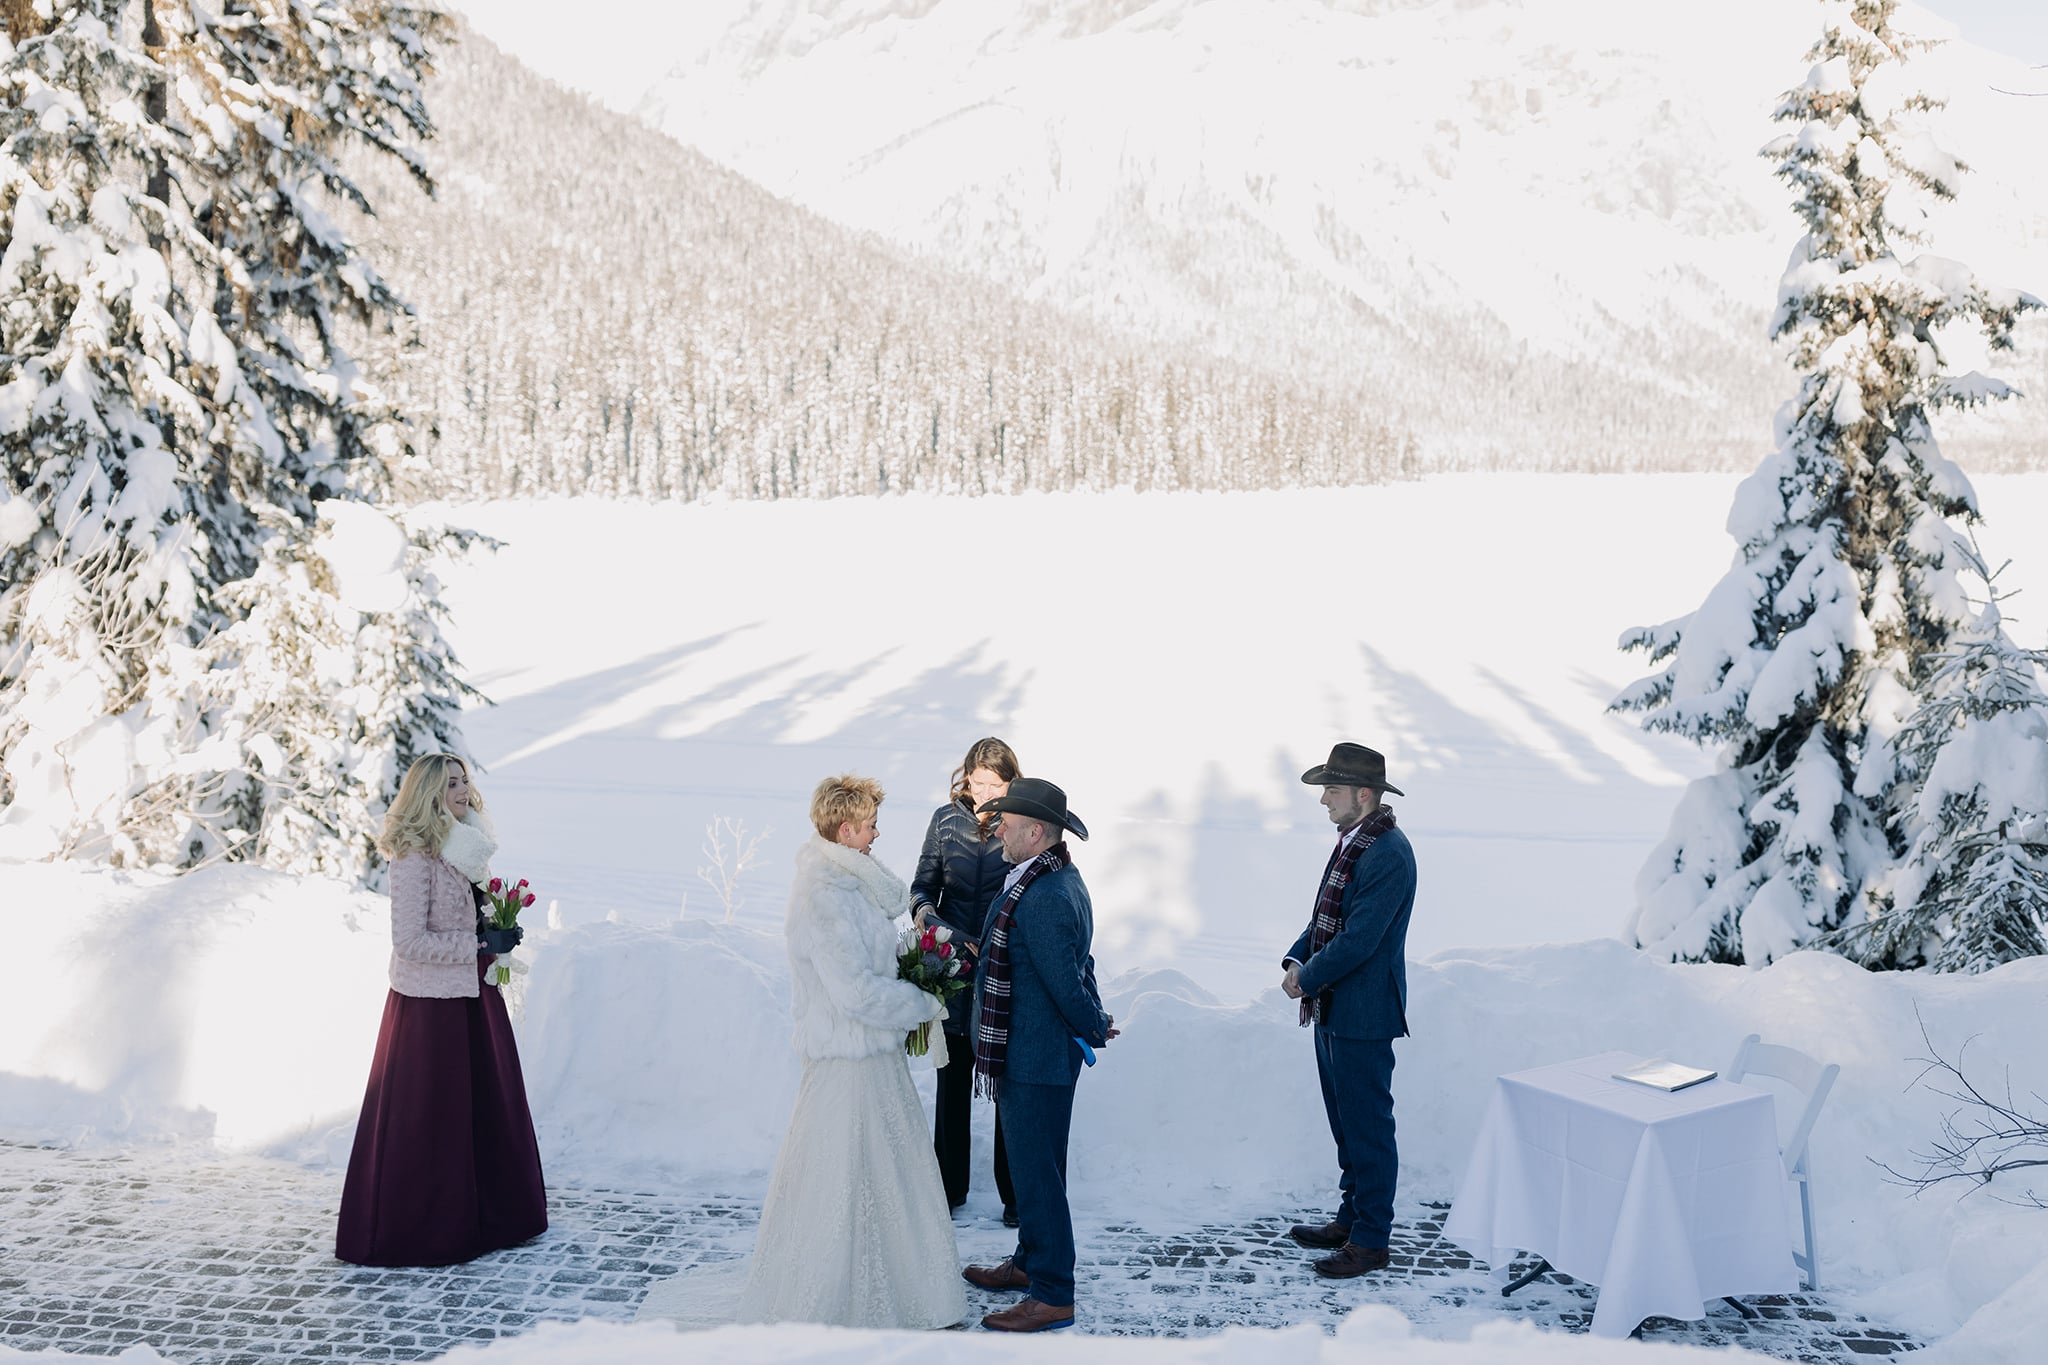 New Year's Eve Elopement at Emerald lake Lodge ceremony outdoors